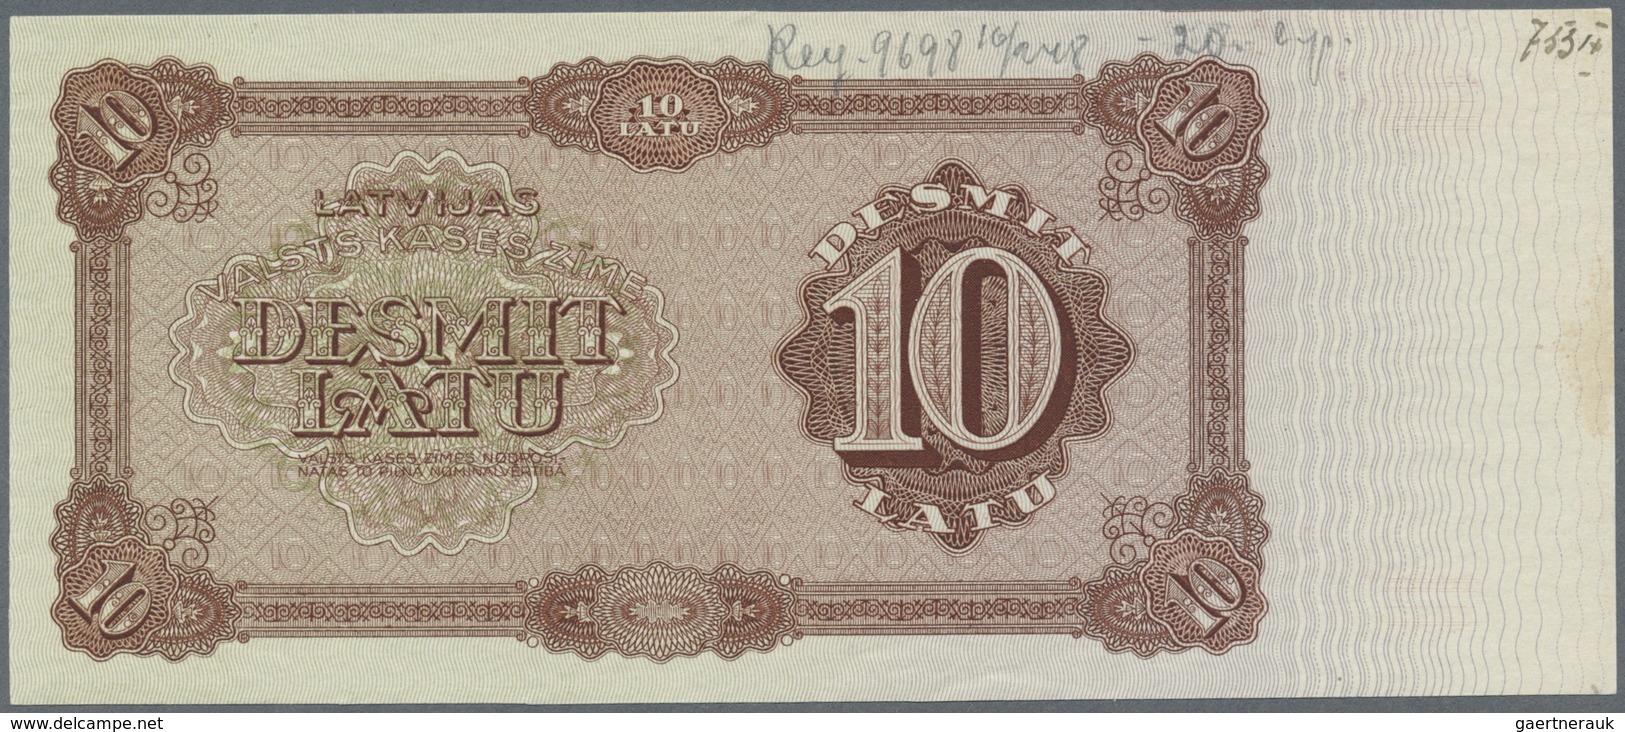 Latvia / Lettland: 10 Latu 1933-34 P. 25p, Uniface Front PROOF Print On Unwatermarked Paper In Brown - Latvia